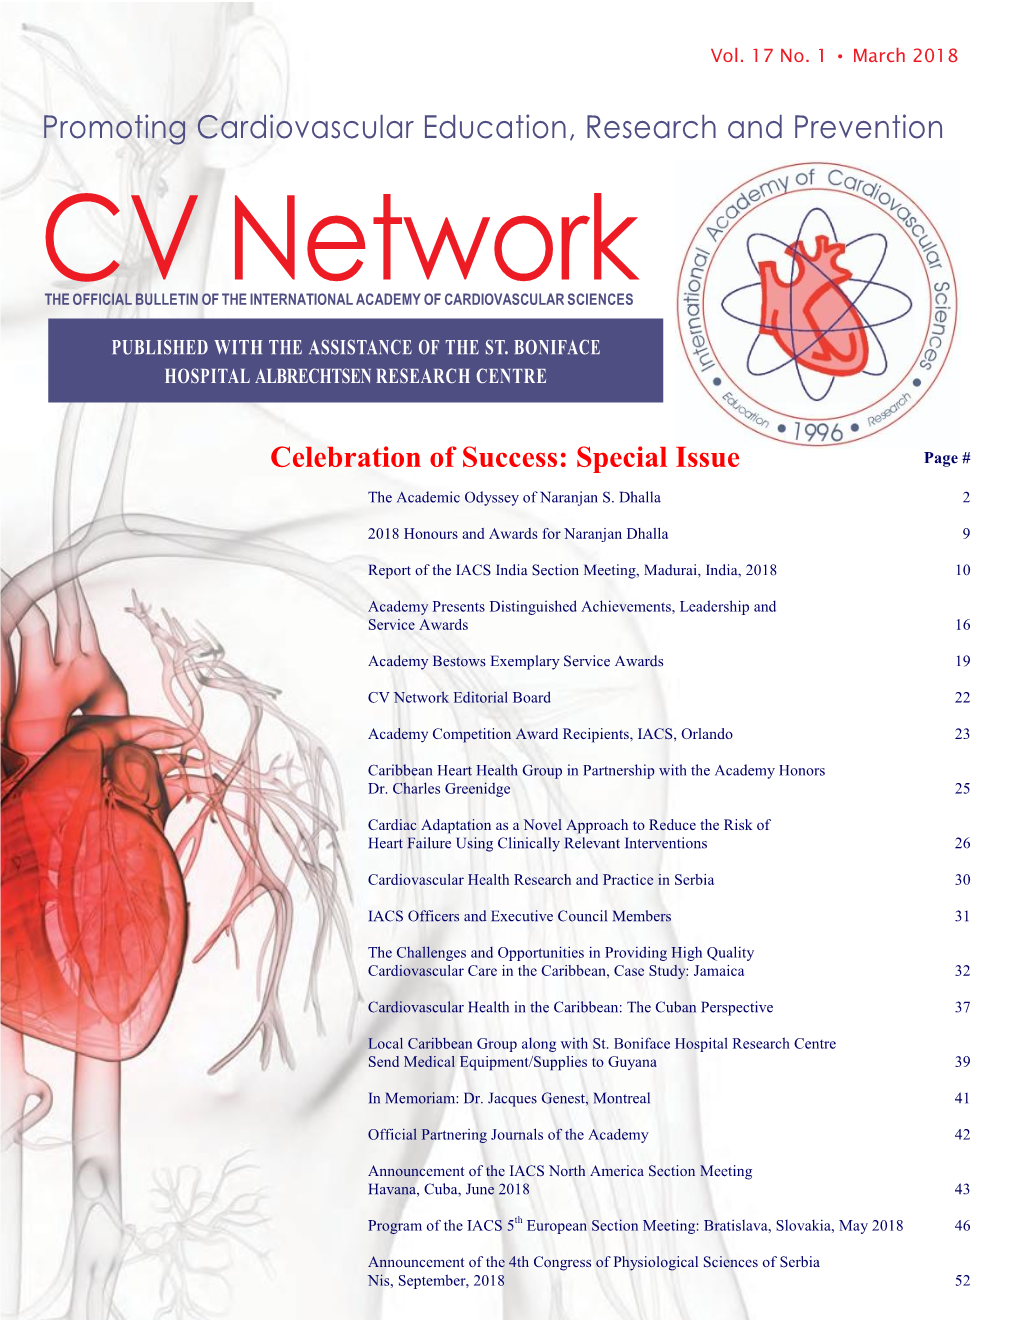 Celebration of Success: Special Issue Page